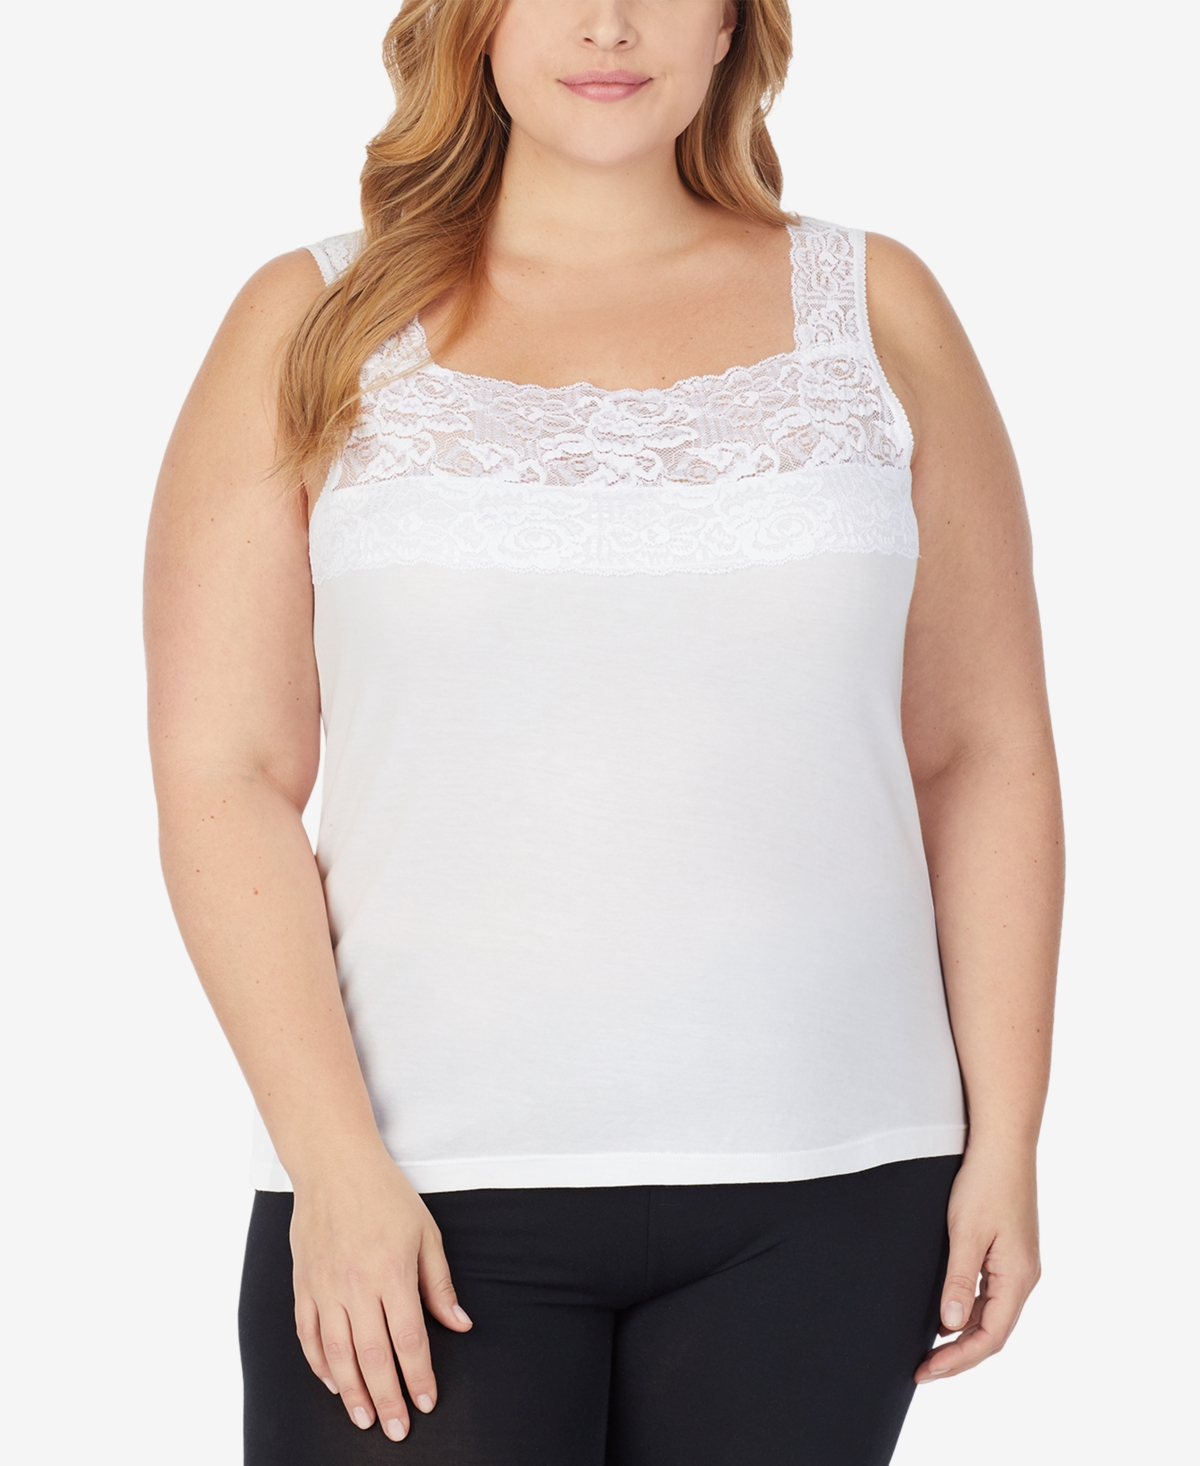 UPC 086201004894 product image for Cuddl Duds Plus Size SofTech Stretch Lace Detail Cami | upcitemdb.com